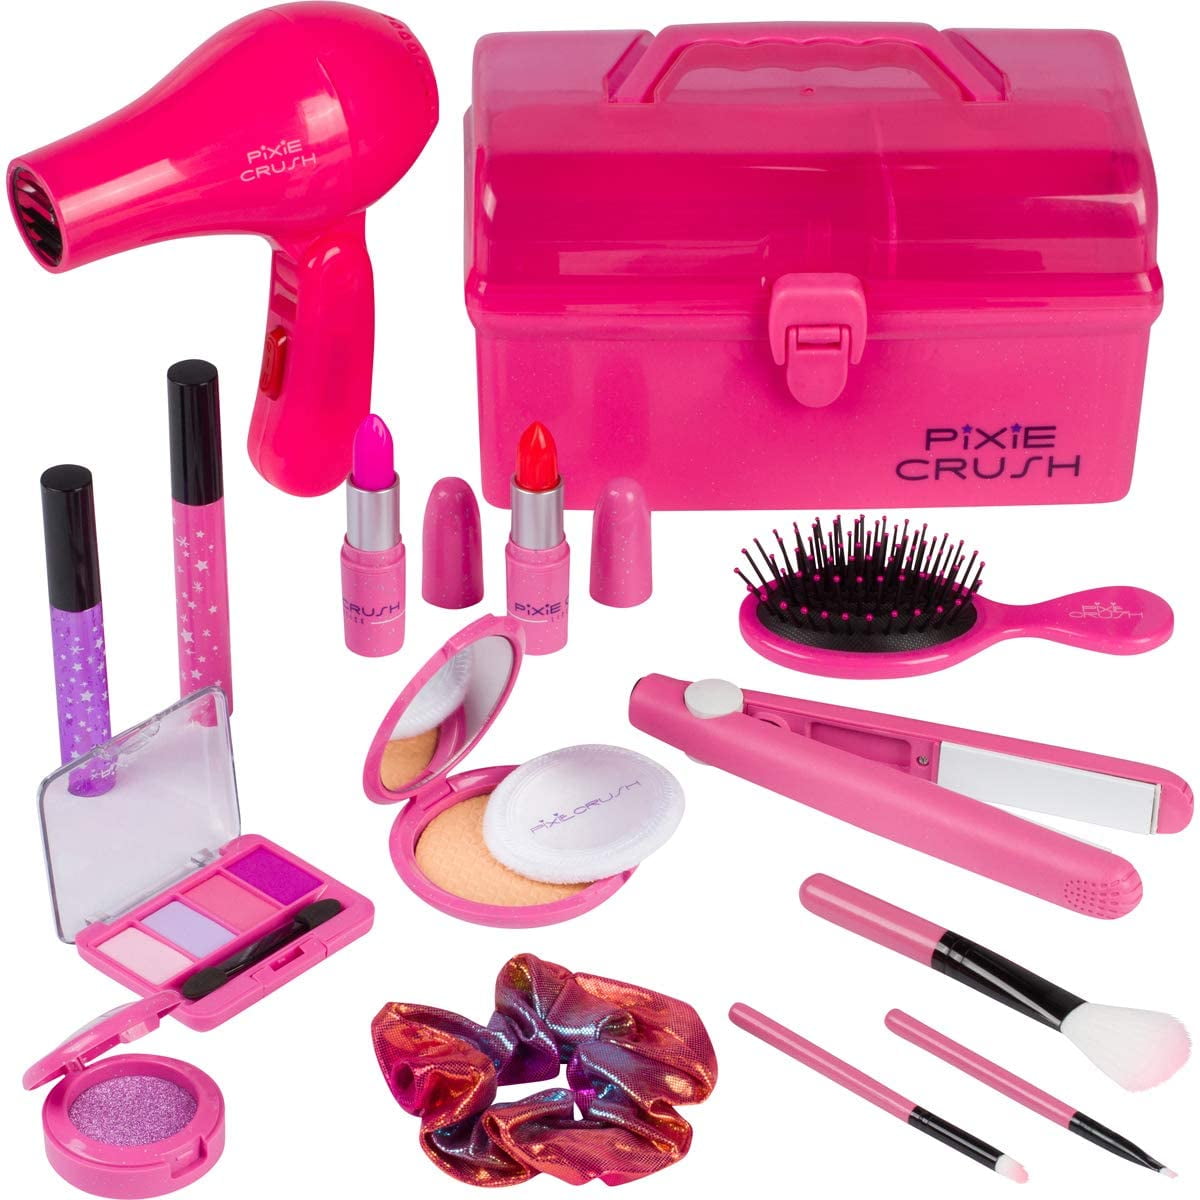 PixieCrush Kids Makeup Kit for Girls with Pretend Hair Dryer and Flat Iron; Play Makeup